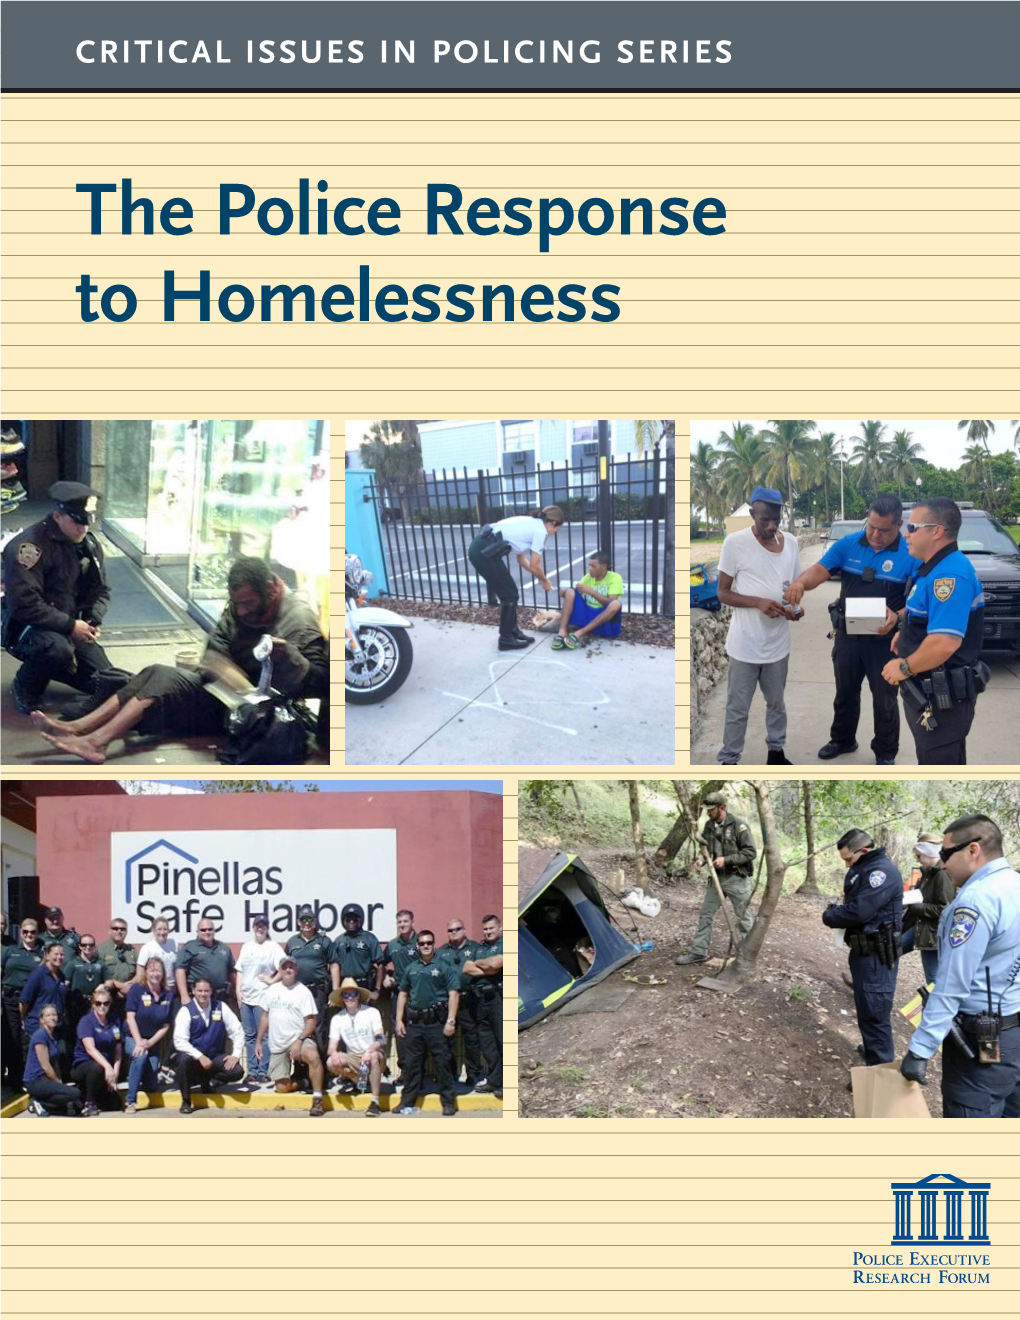 The Police Response to Homelessness